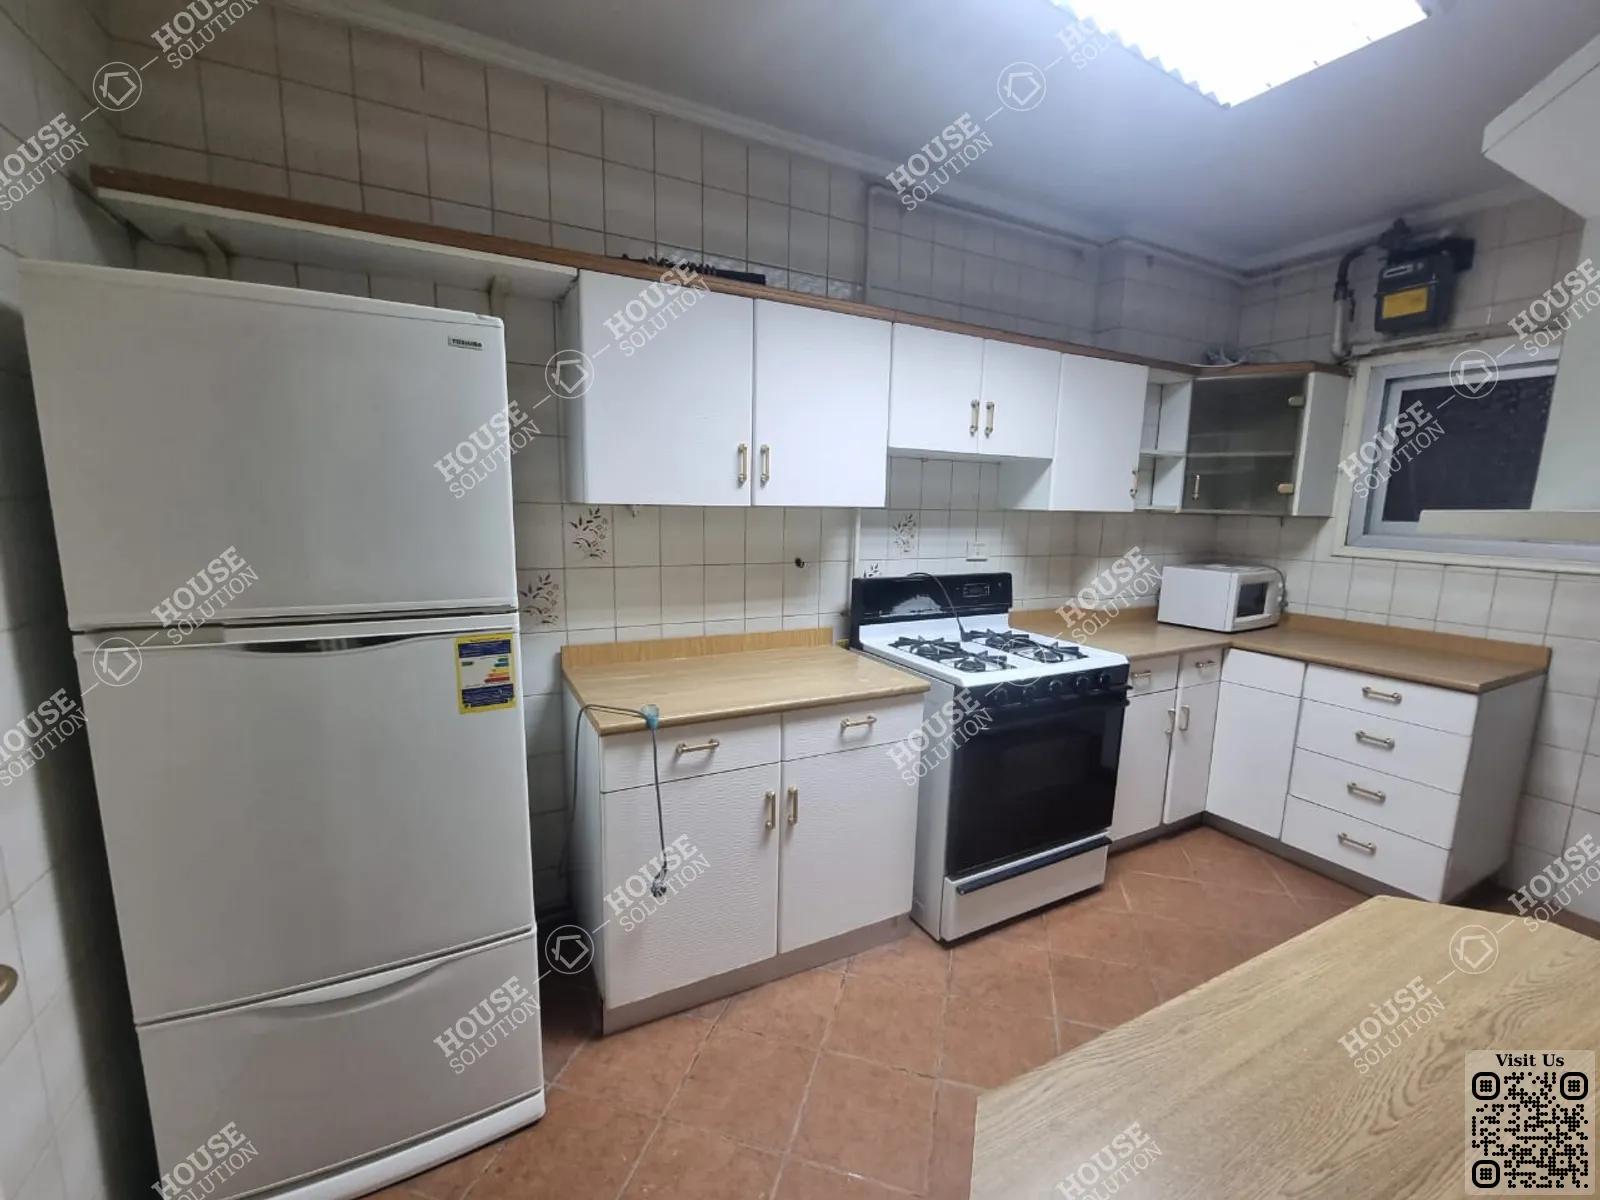 KITCHEN  @ Apartments For Rent In Maadi Maadi Sarayat Area: 185 m² consists of 3 Bedrooms 2 Bathrooms Furnished 5 stars #5715-1